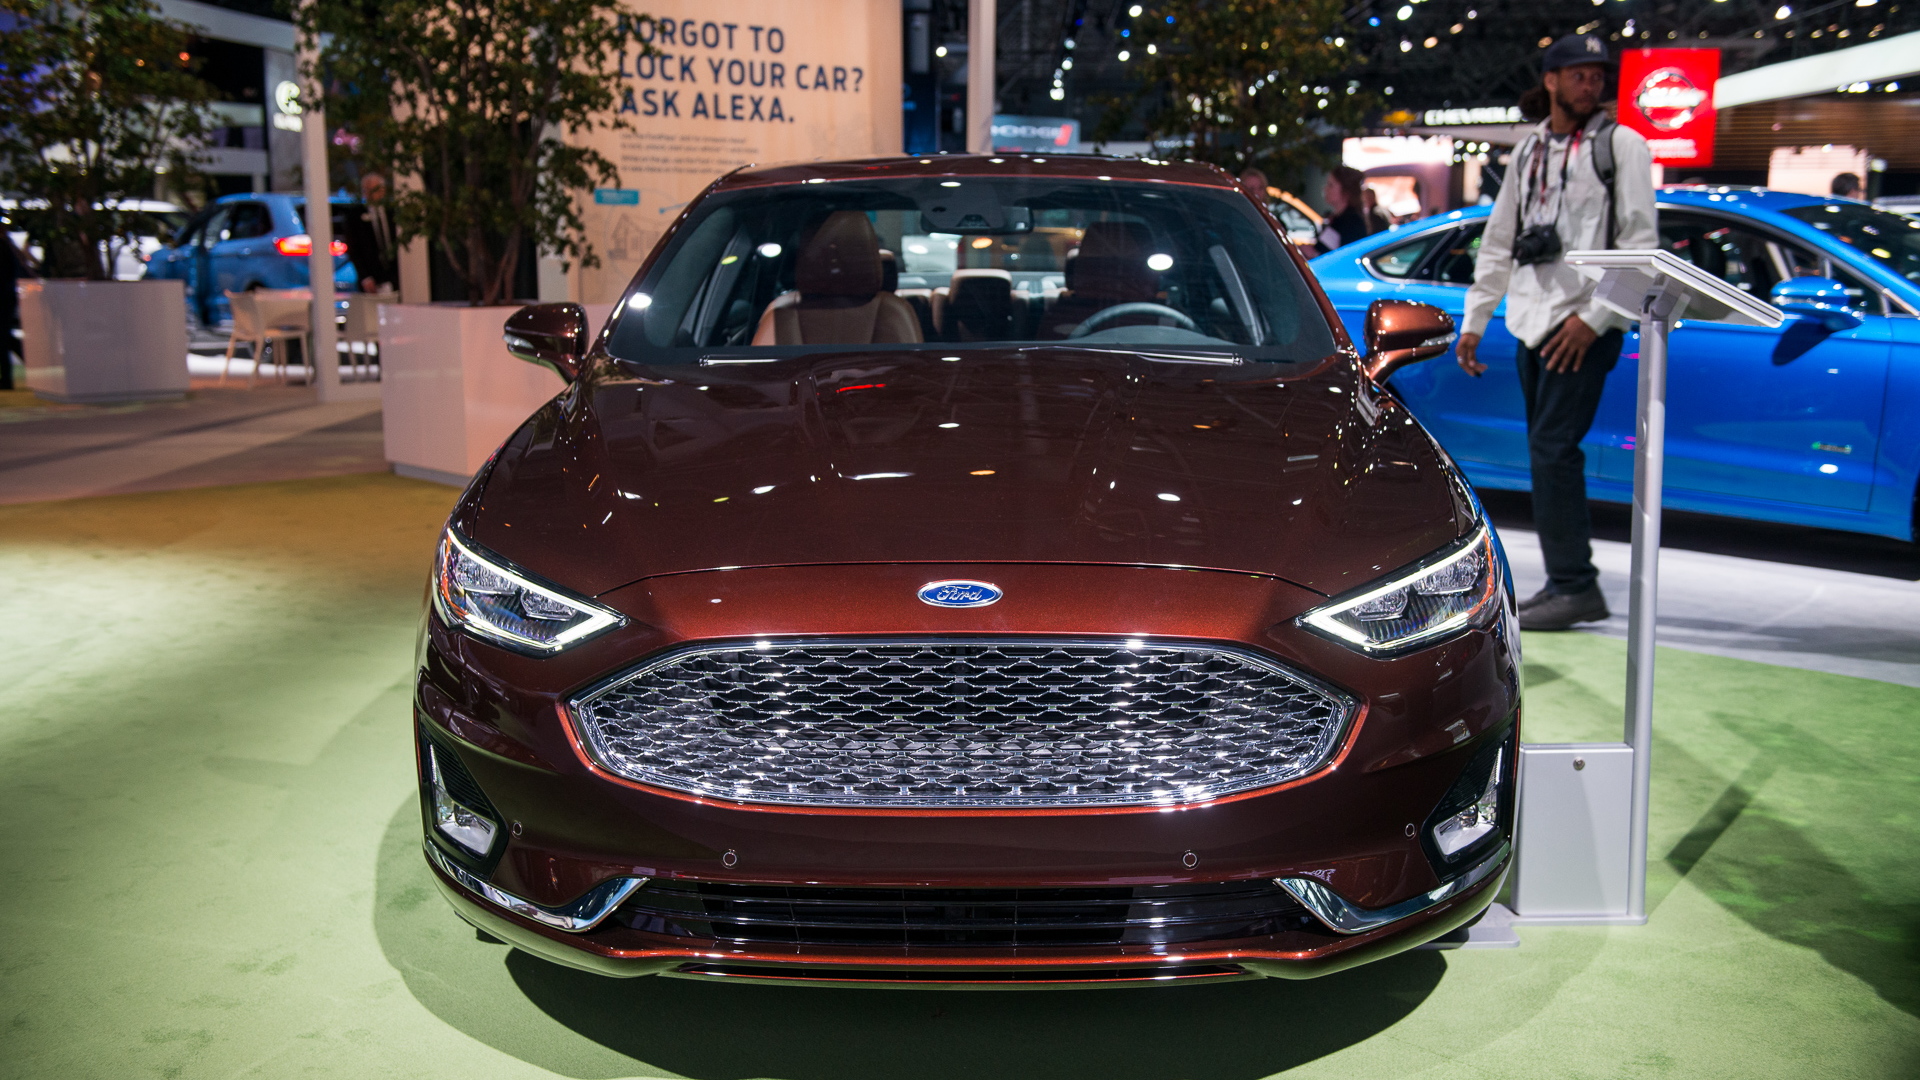 2019 Ford Fusion, 2018 New York auto show